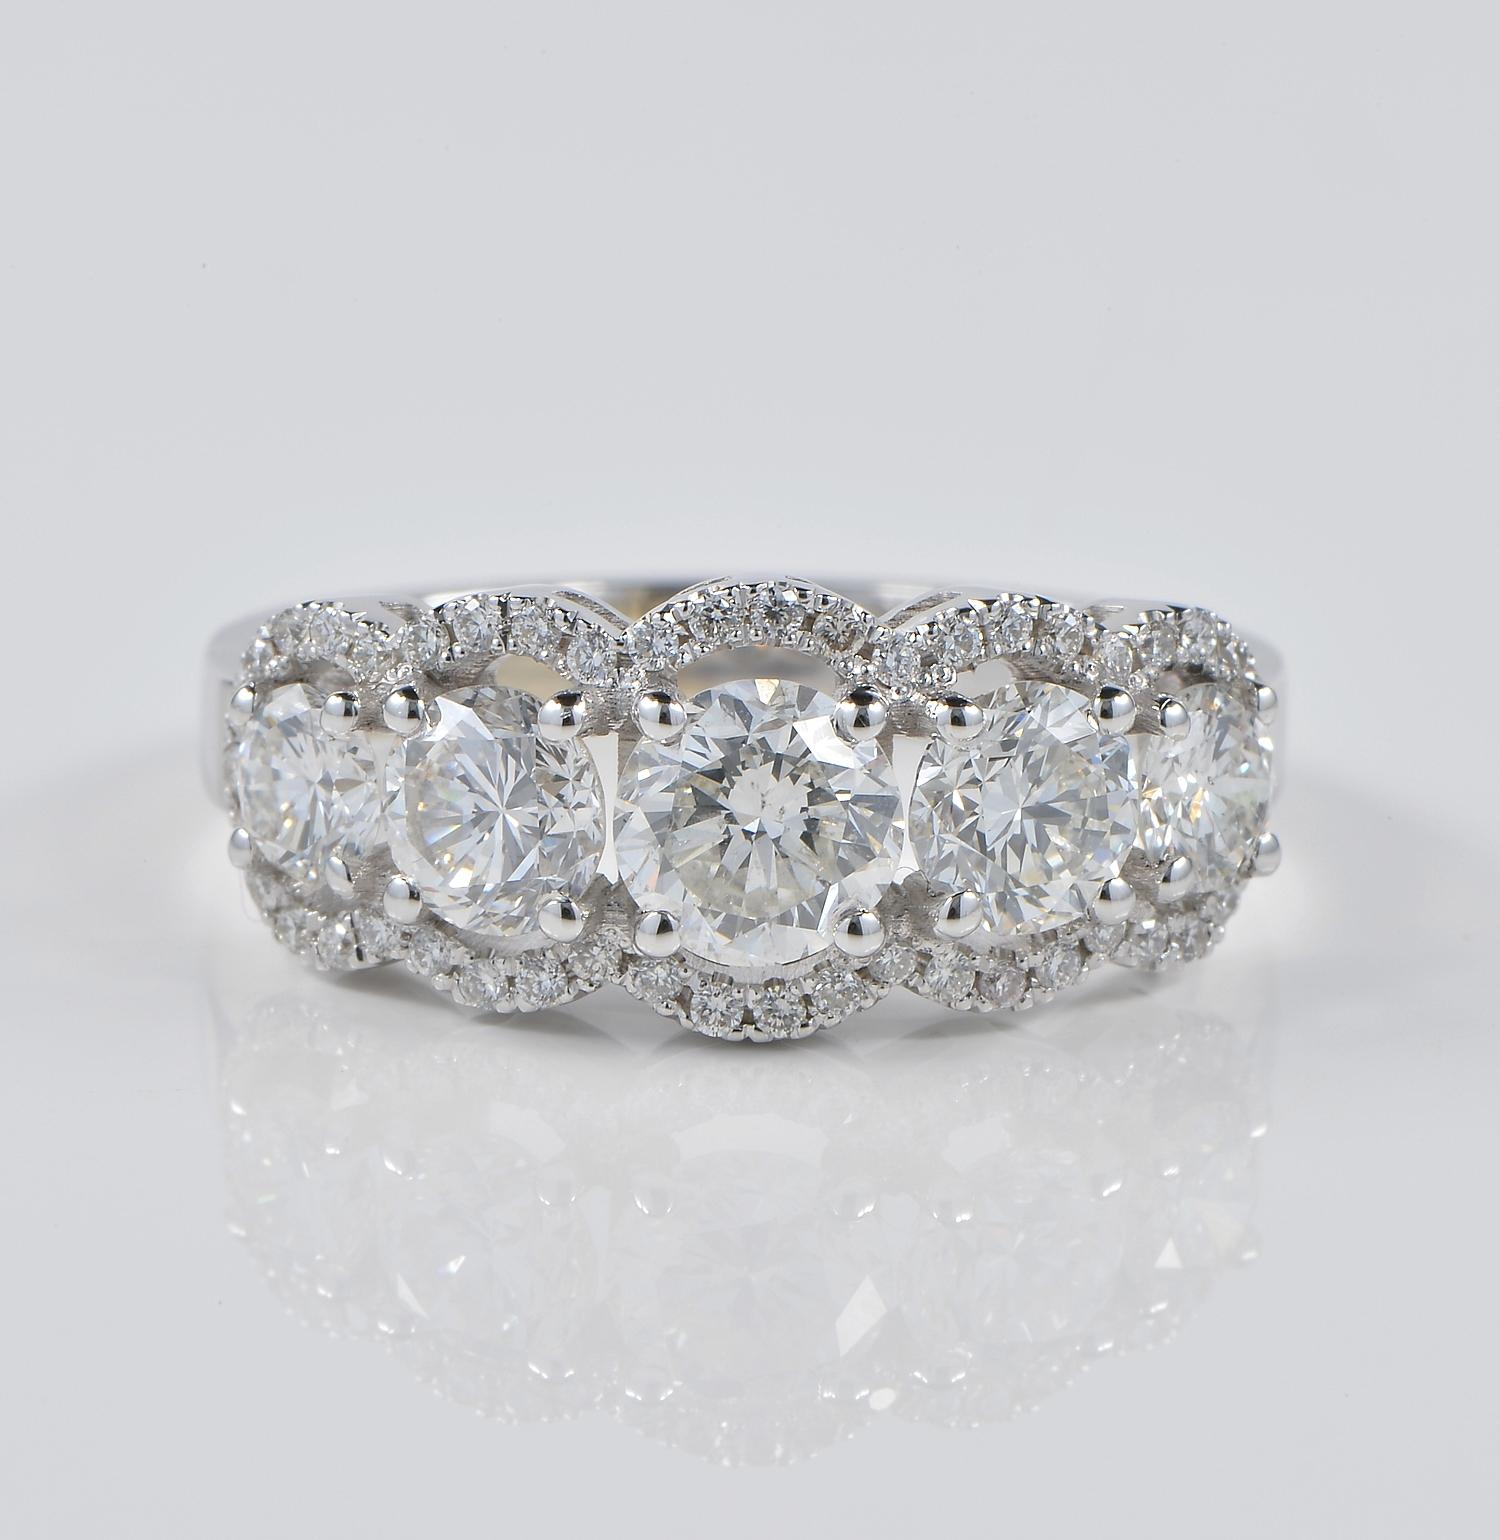 Beautiful example of classy Diamond five stone ring, Estate classy ring
Hand crafted as unique of solid 18 KT white gold
Distinctive 5 stone design expressed in a particular little Diamond frame for a more sophisticate look to the array of Diamond